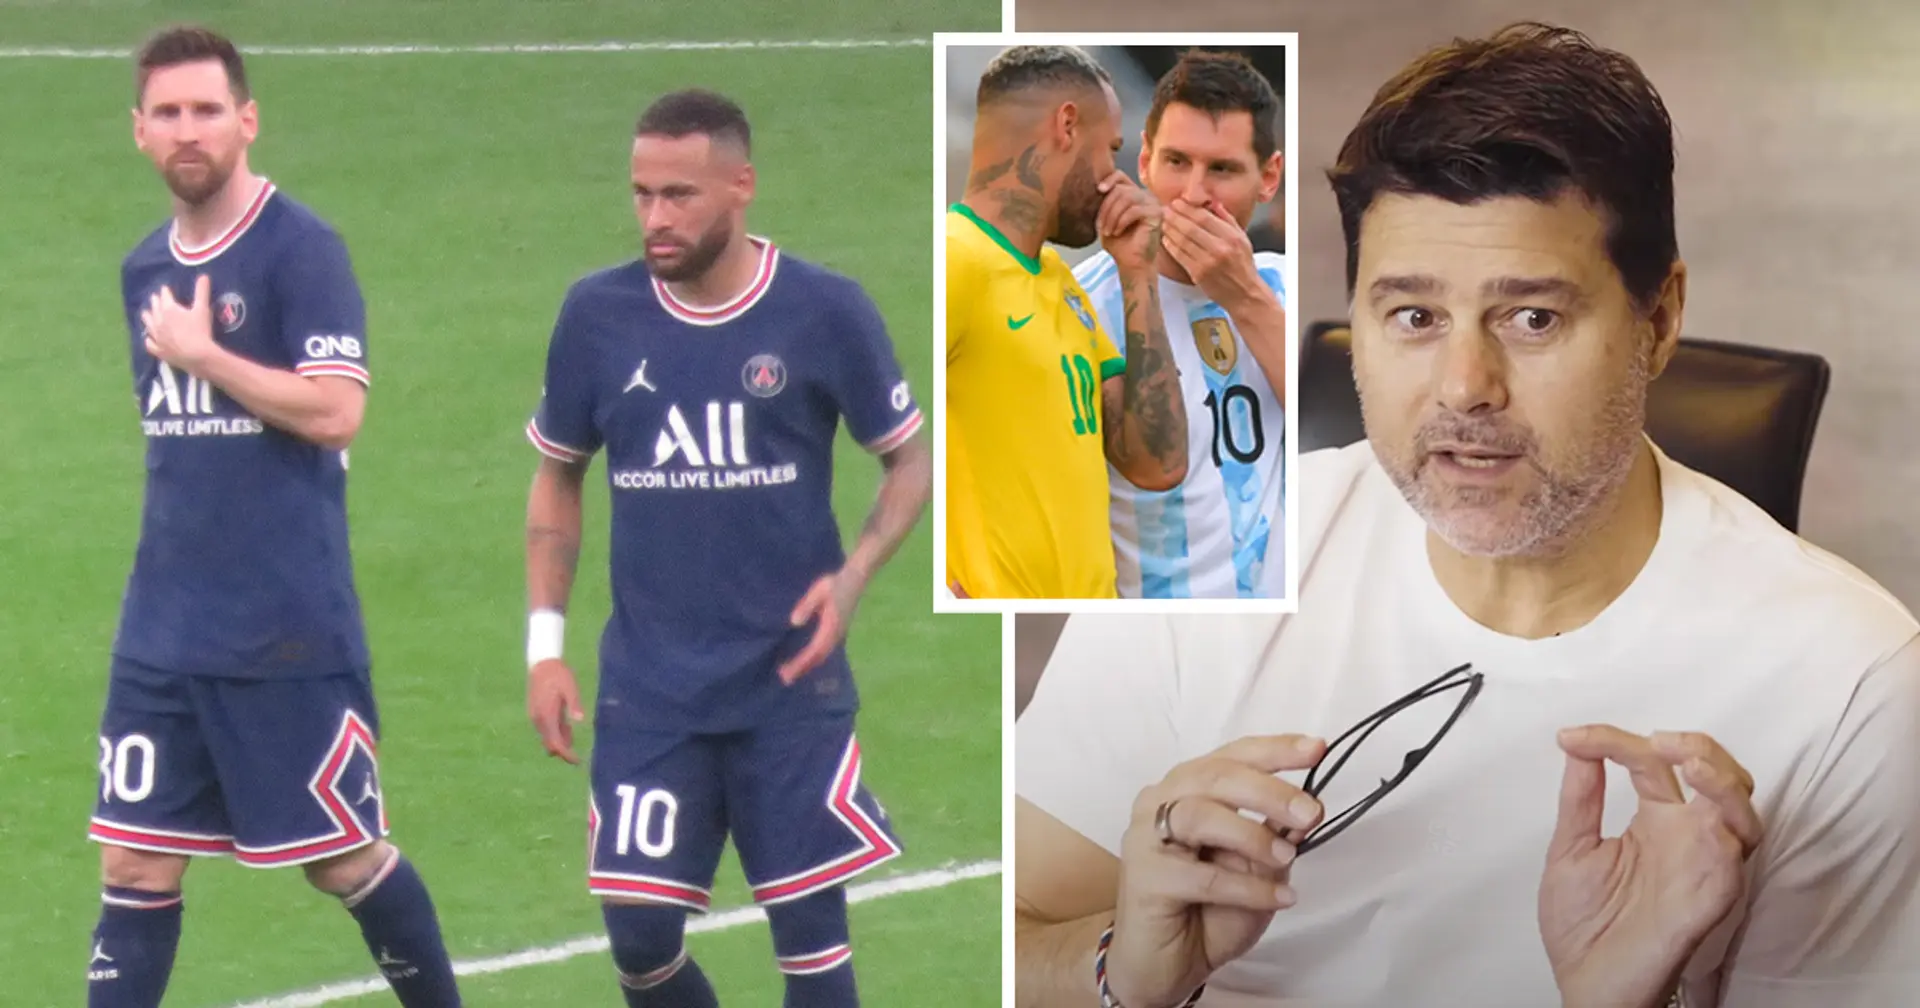 'I had to justify myself': Pochettino opens up on Neymar's reaction when he branded Messi as the best player in the world